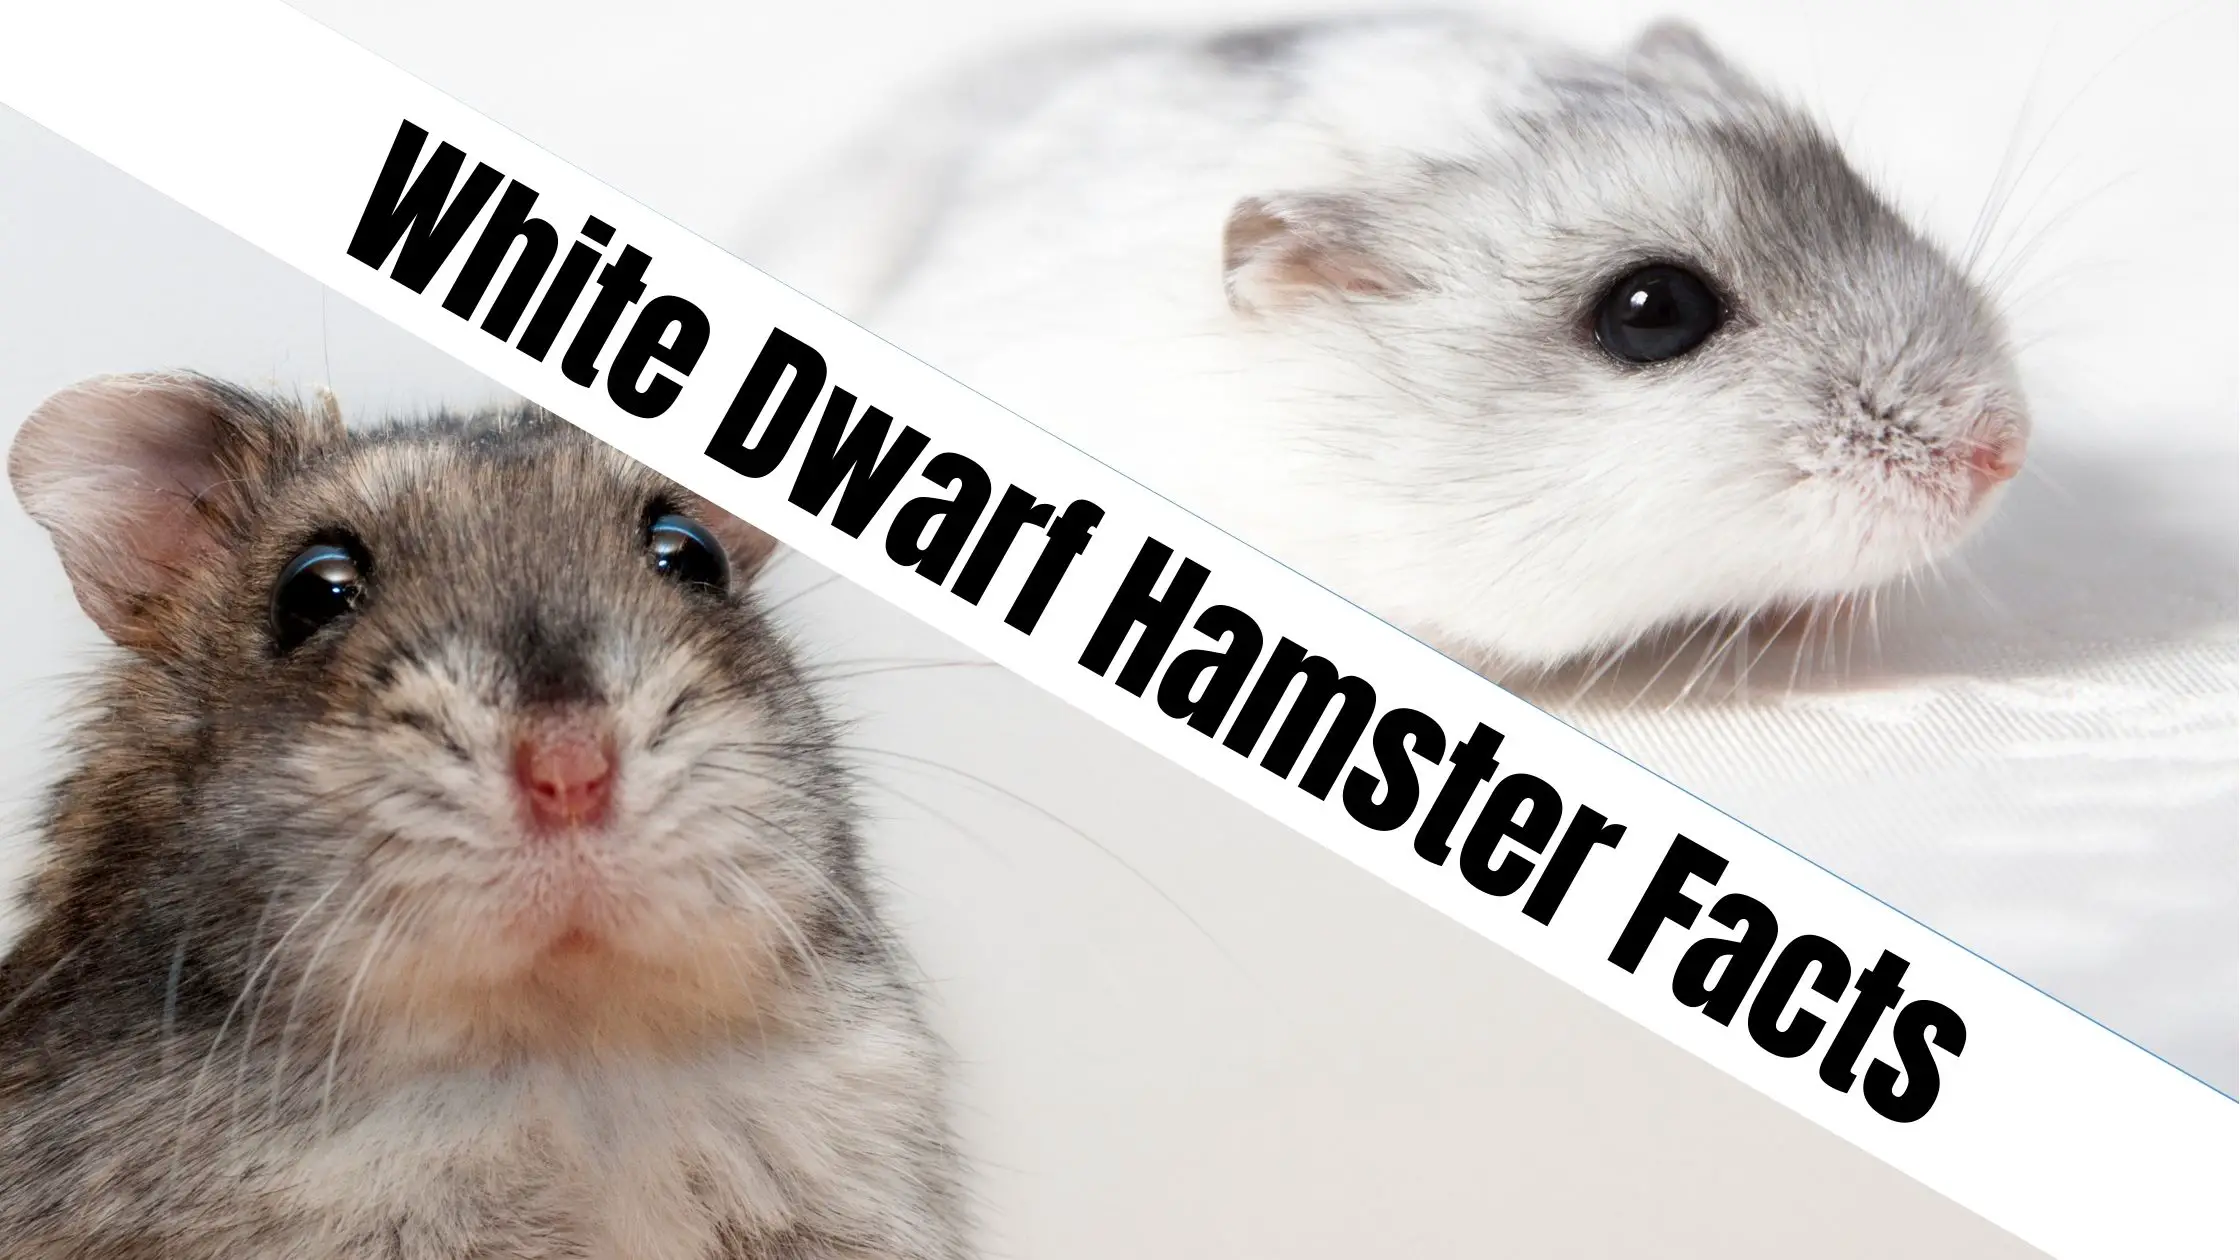 Tiny, But Mighty: Winter White Dwarf Hamster Facts